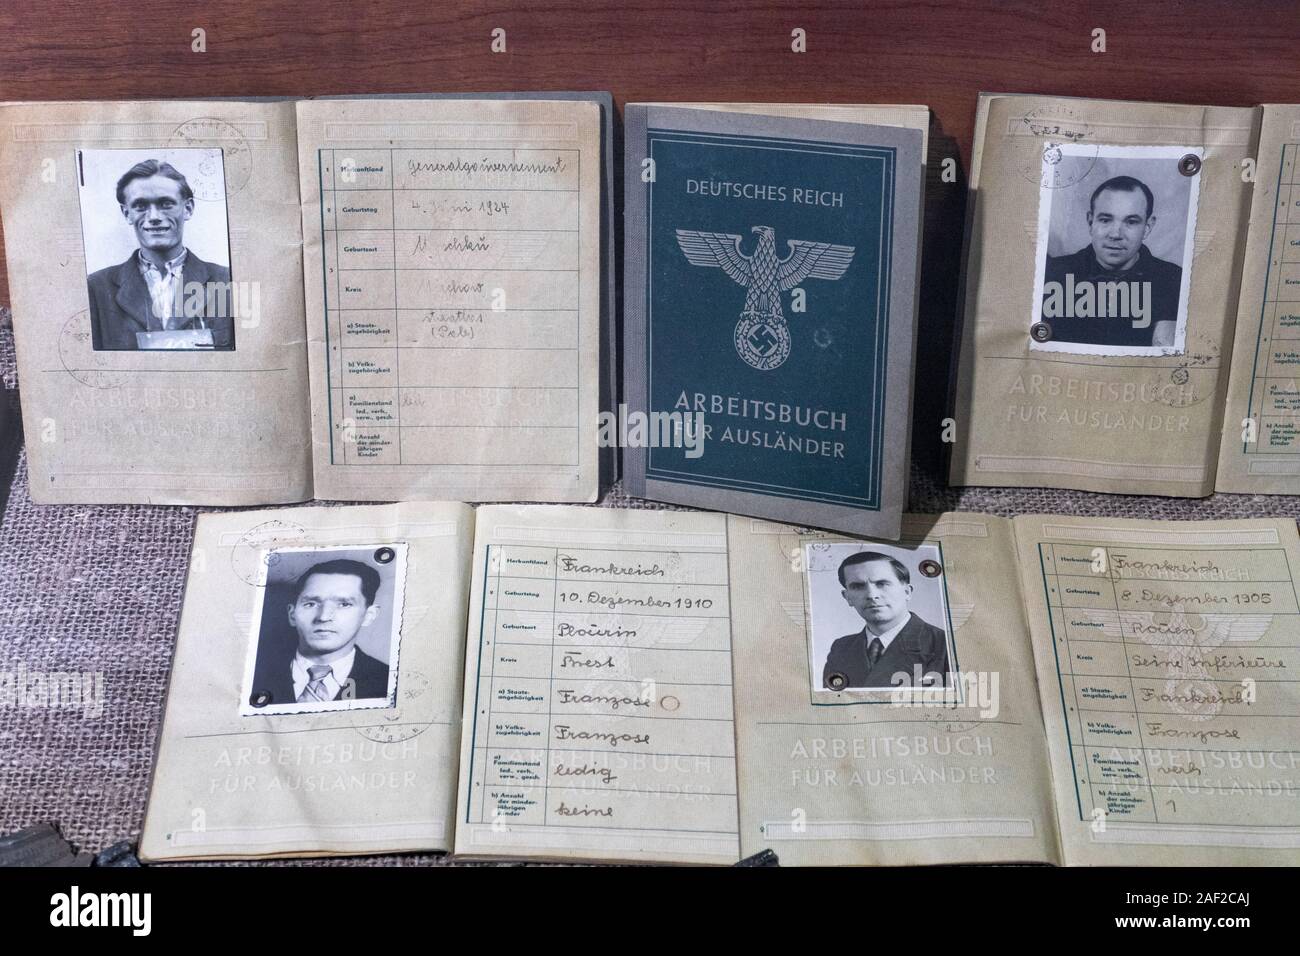 Travel documents forged by allied prisoners to aid their escape across Nazi occupied Europe.. Stalag Luft III - Stammlager Luft III near the Polish to Stock Photo